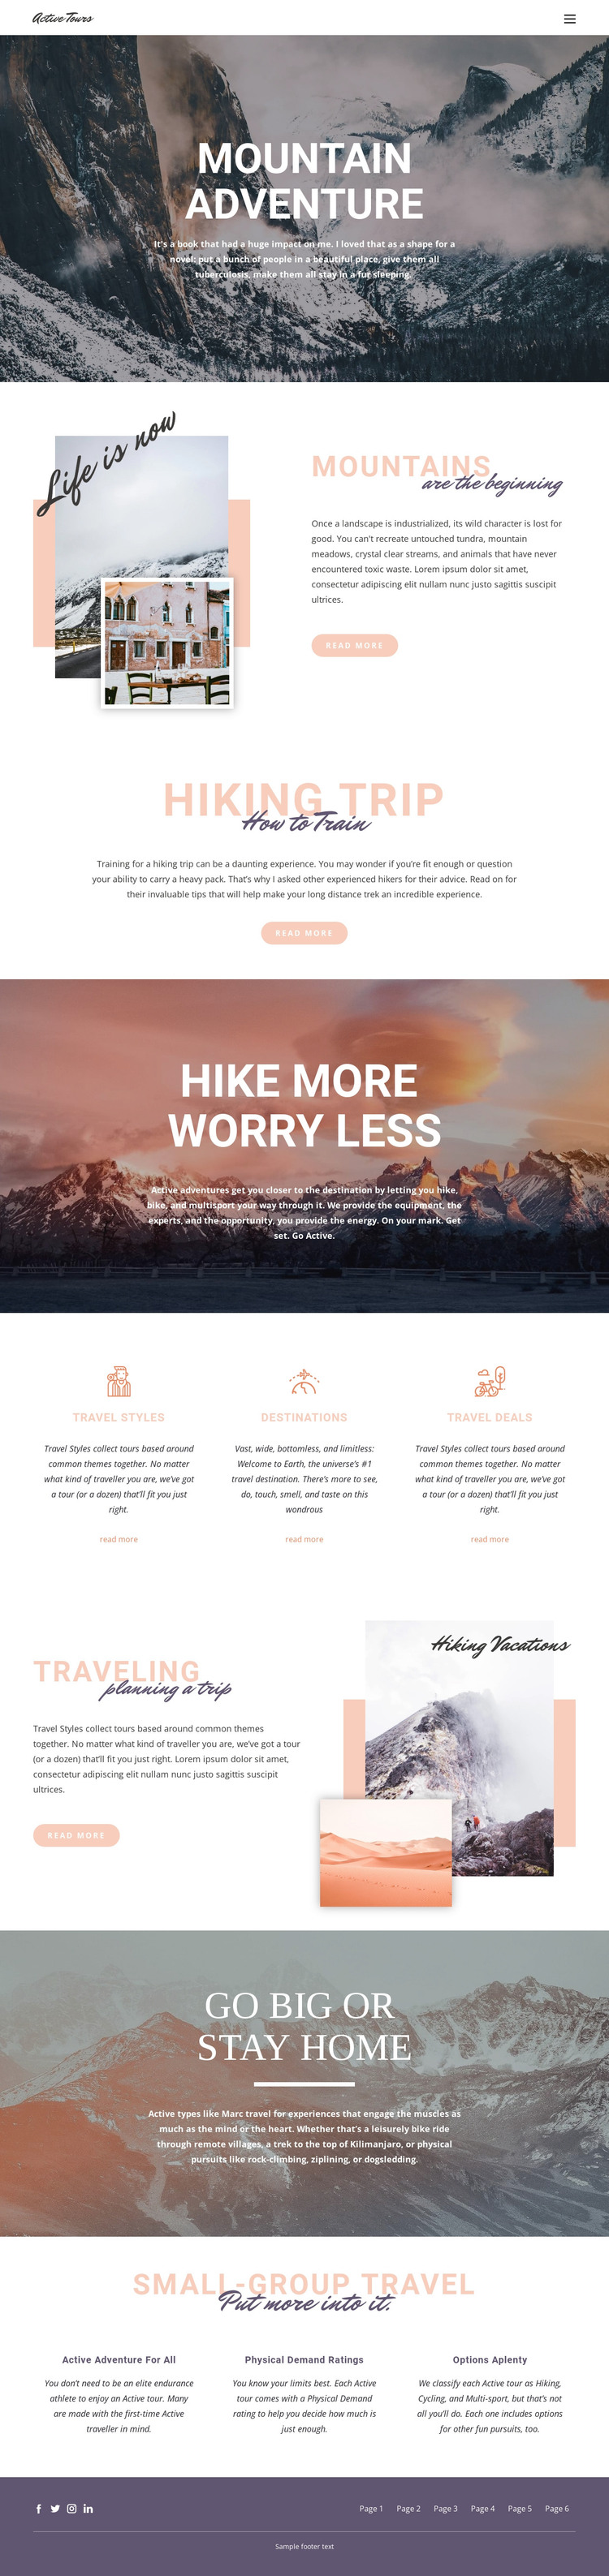 Guided backpacking trips HTML Template